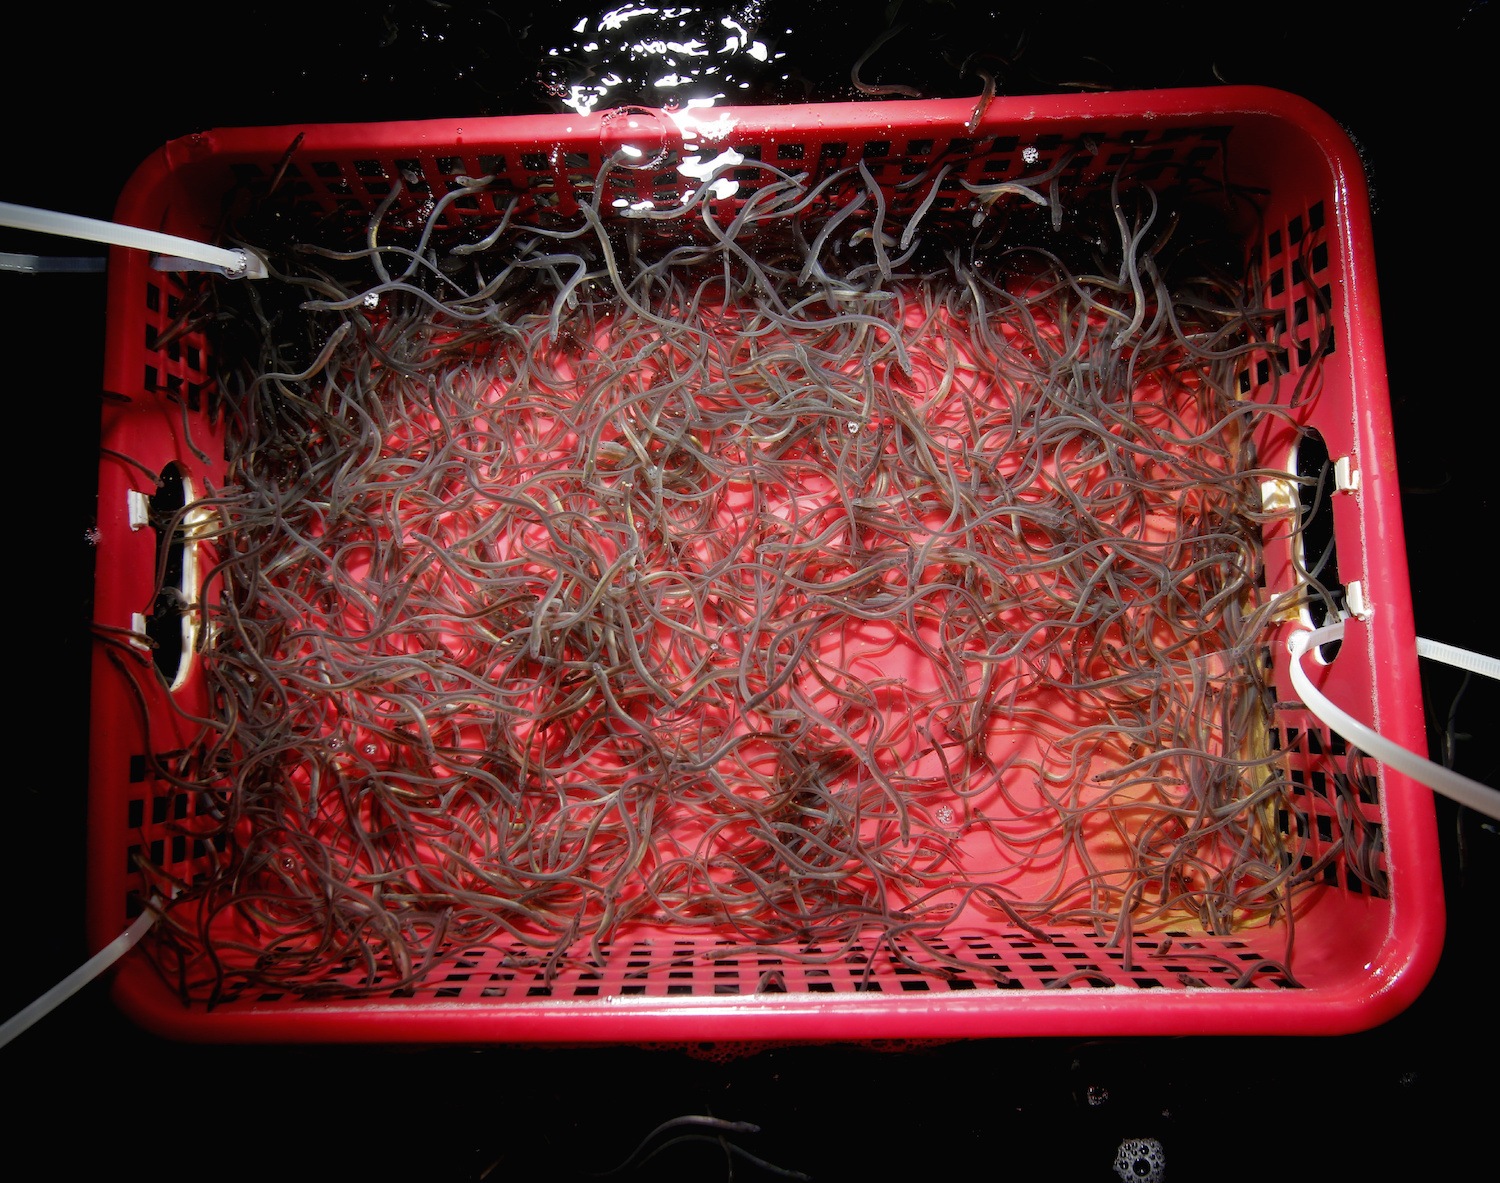 A red bucket filled with elvers that Sarah Rademaker bought for American Unagi. May 2020